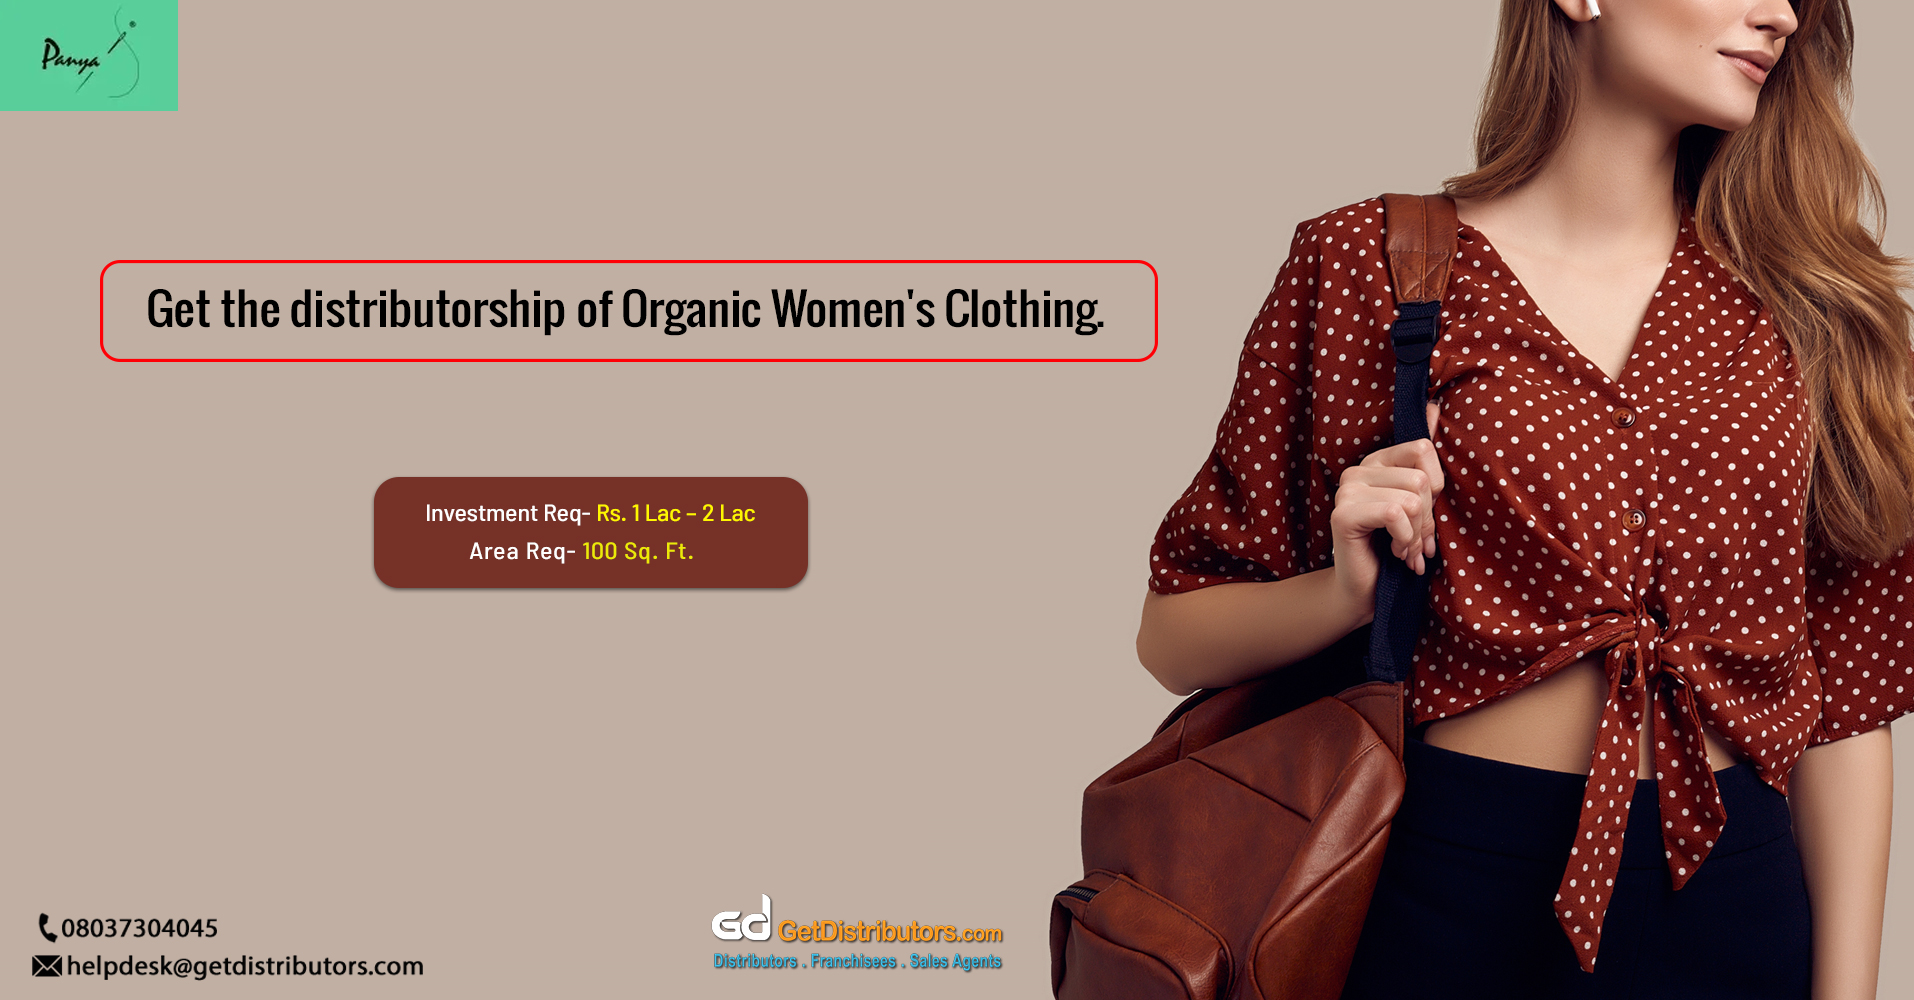 Offering a wide range of organic ladies wearables for distribution